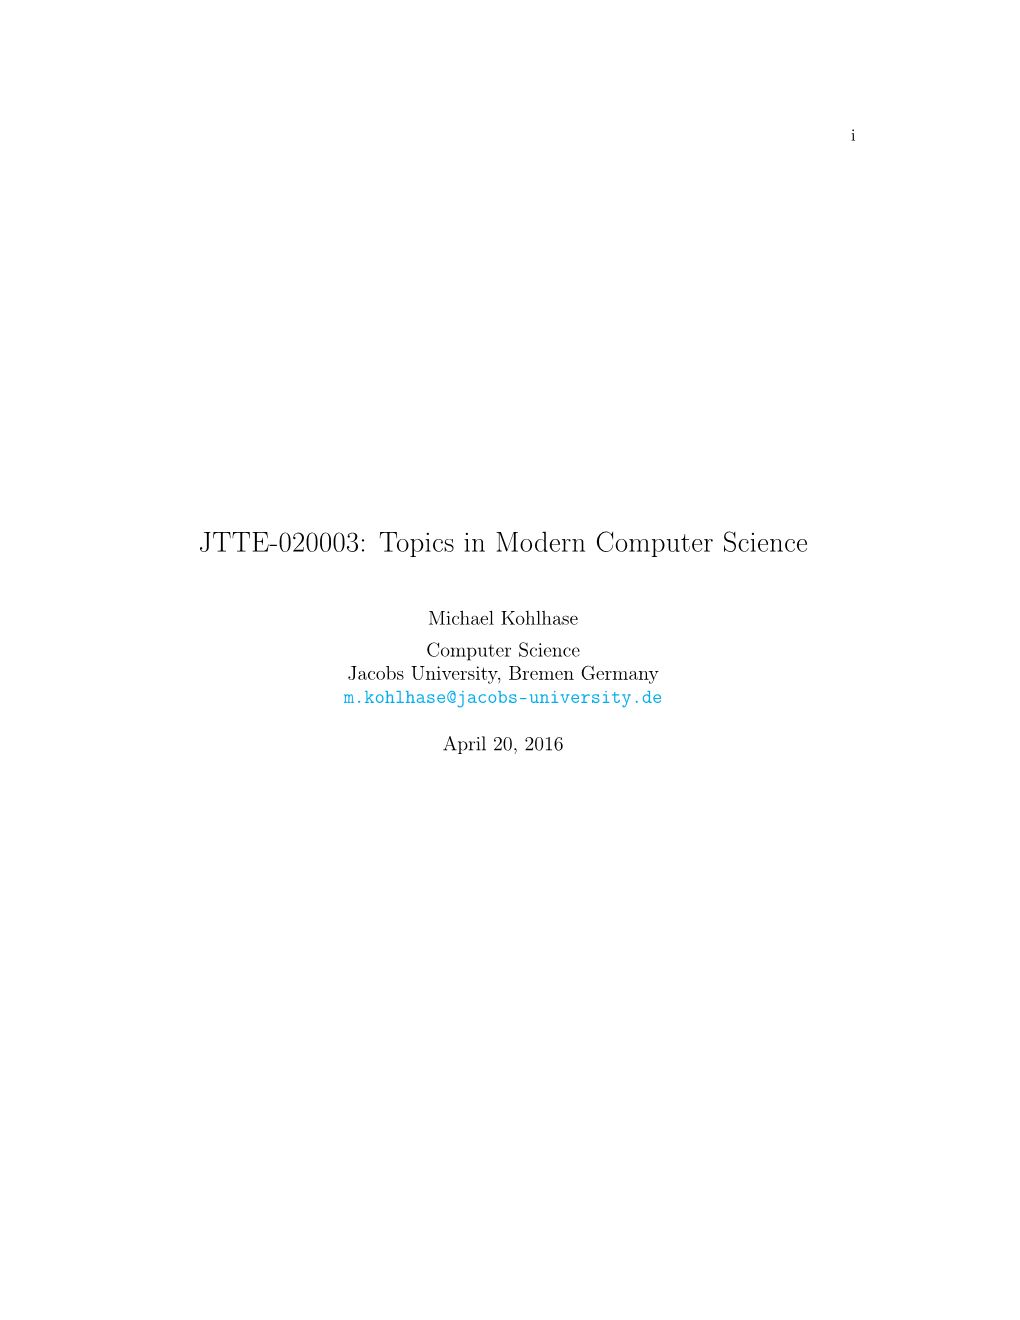 JTTE-020003: Topics in Modern Computer Science